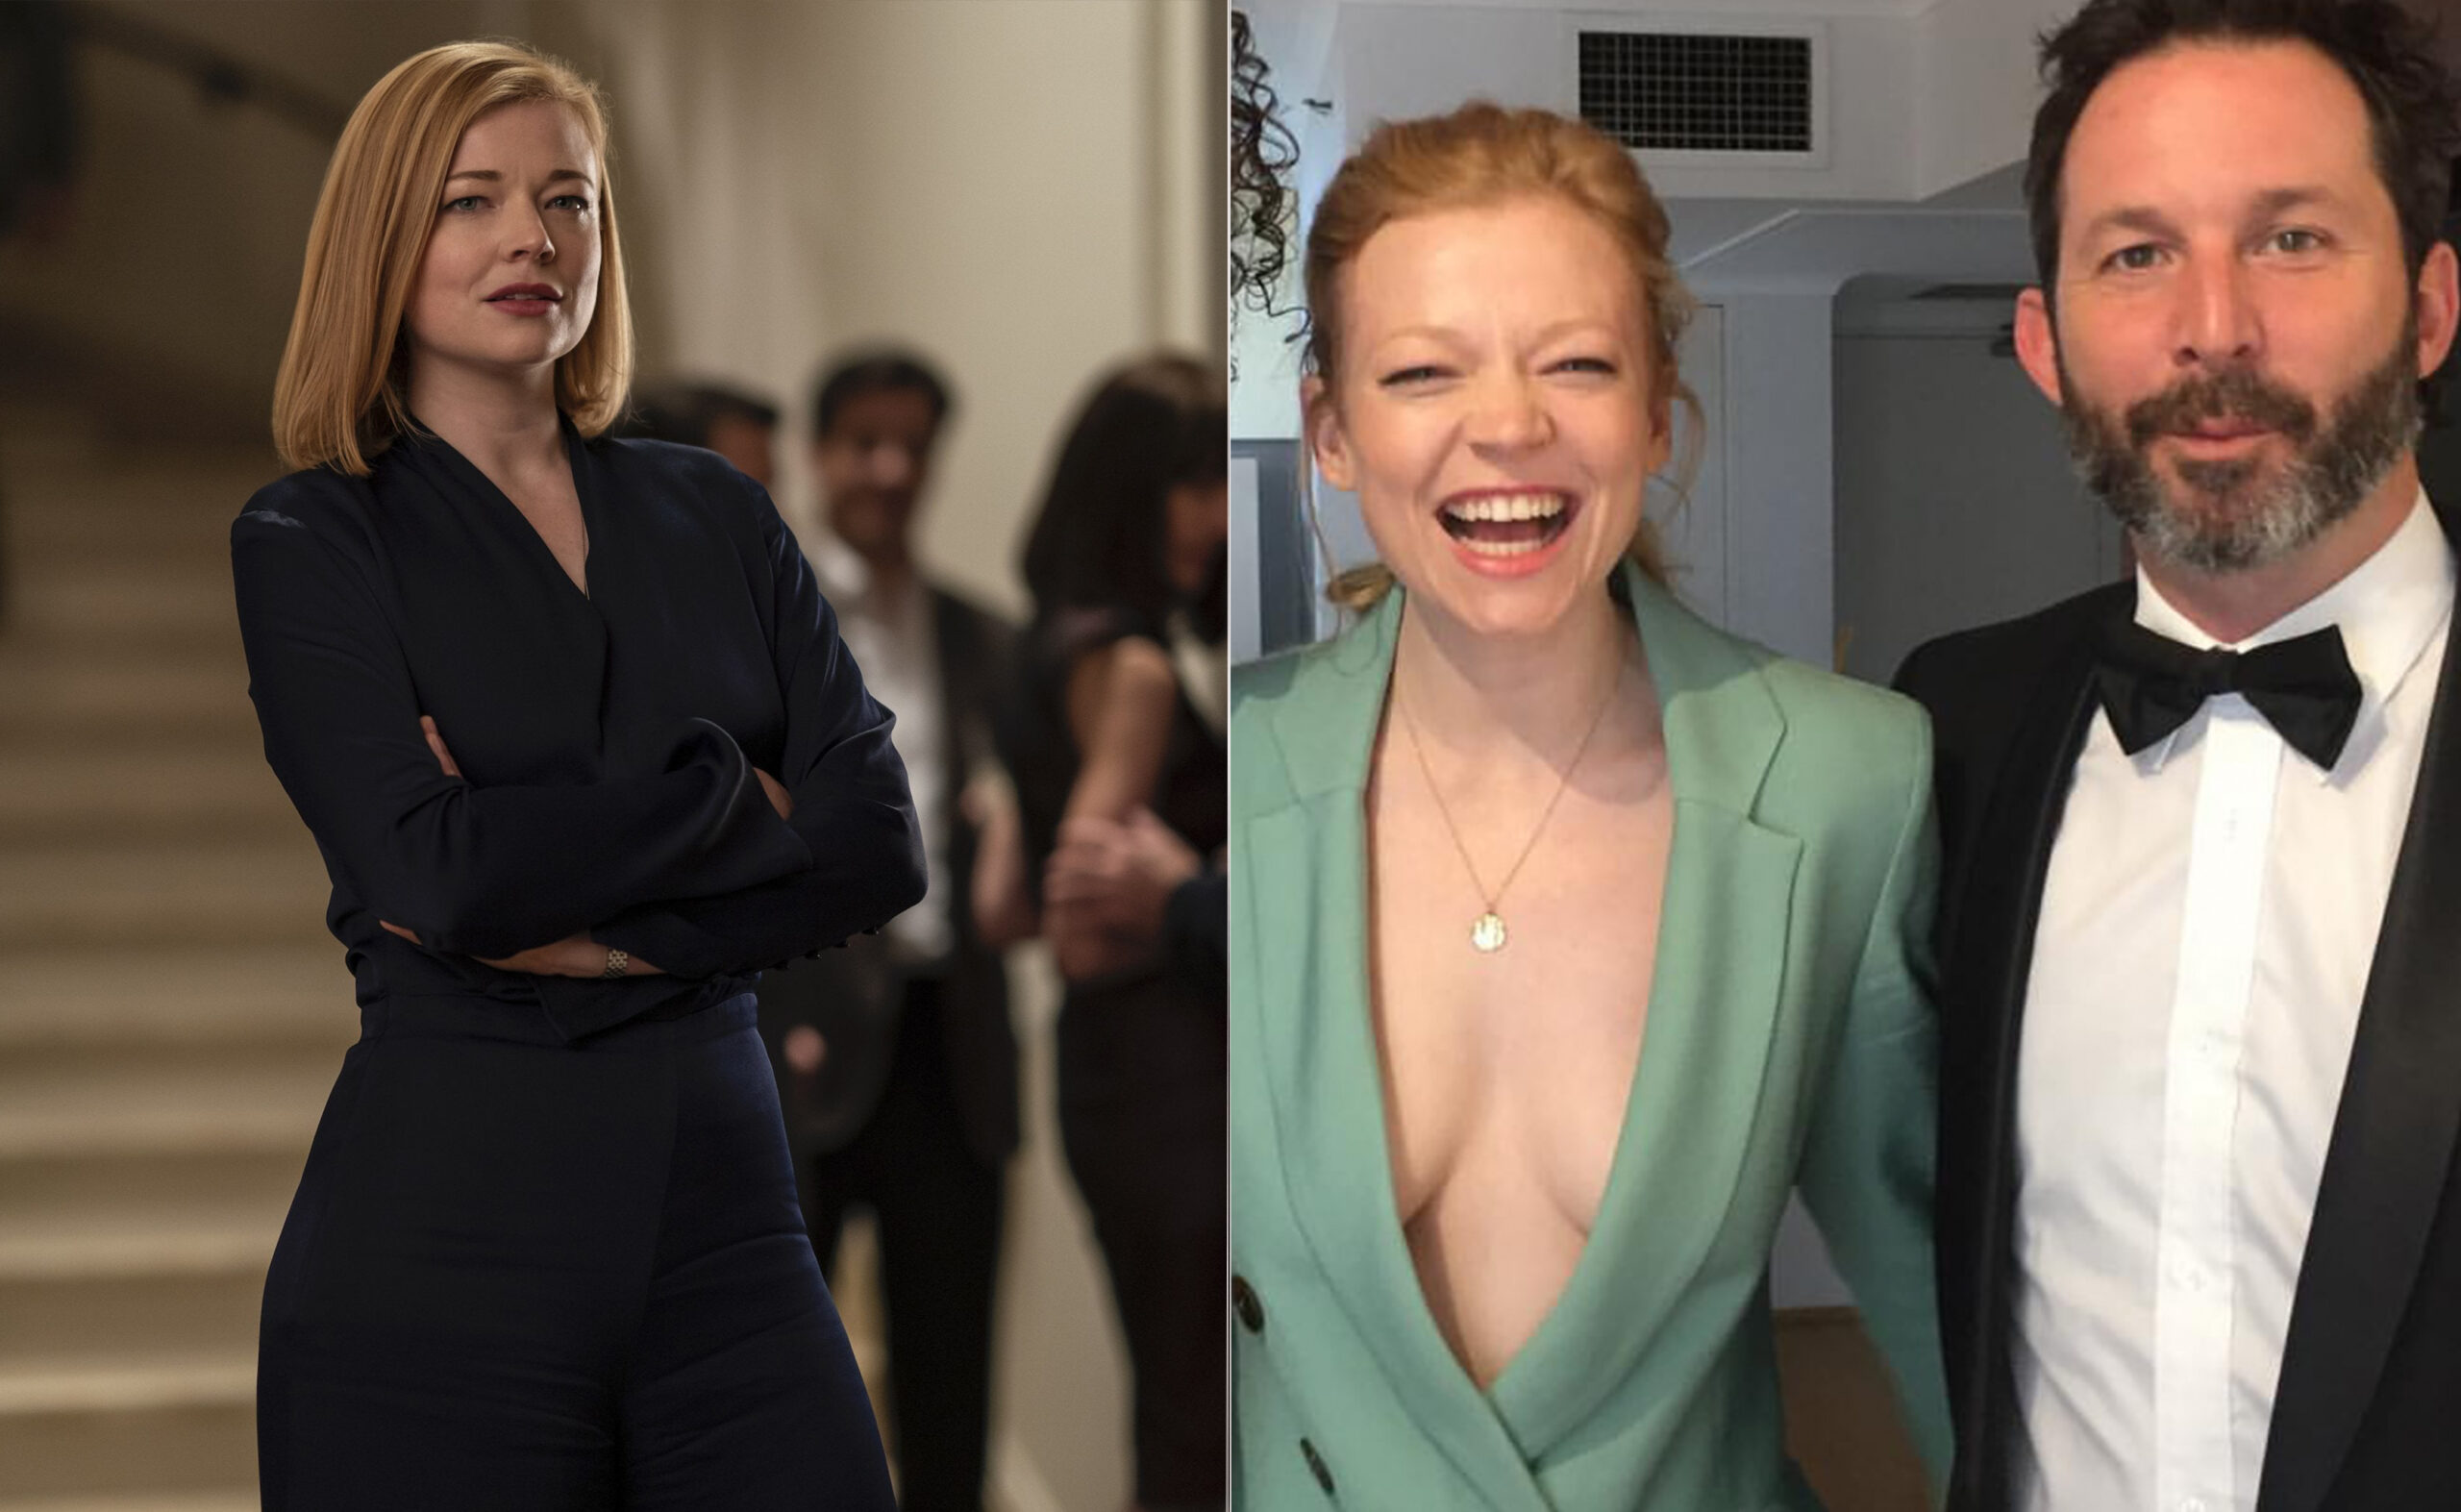 The unconventional but sweet way Succession star Sarah Snook and her comedian husband found love and got engaged: “It was the only option”